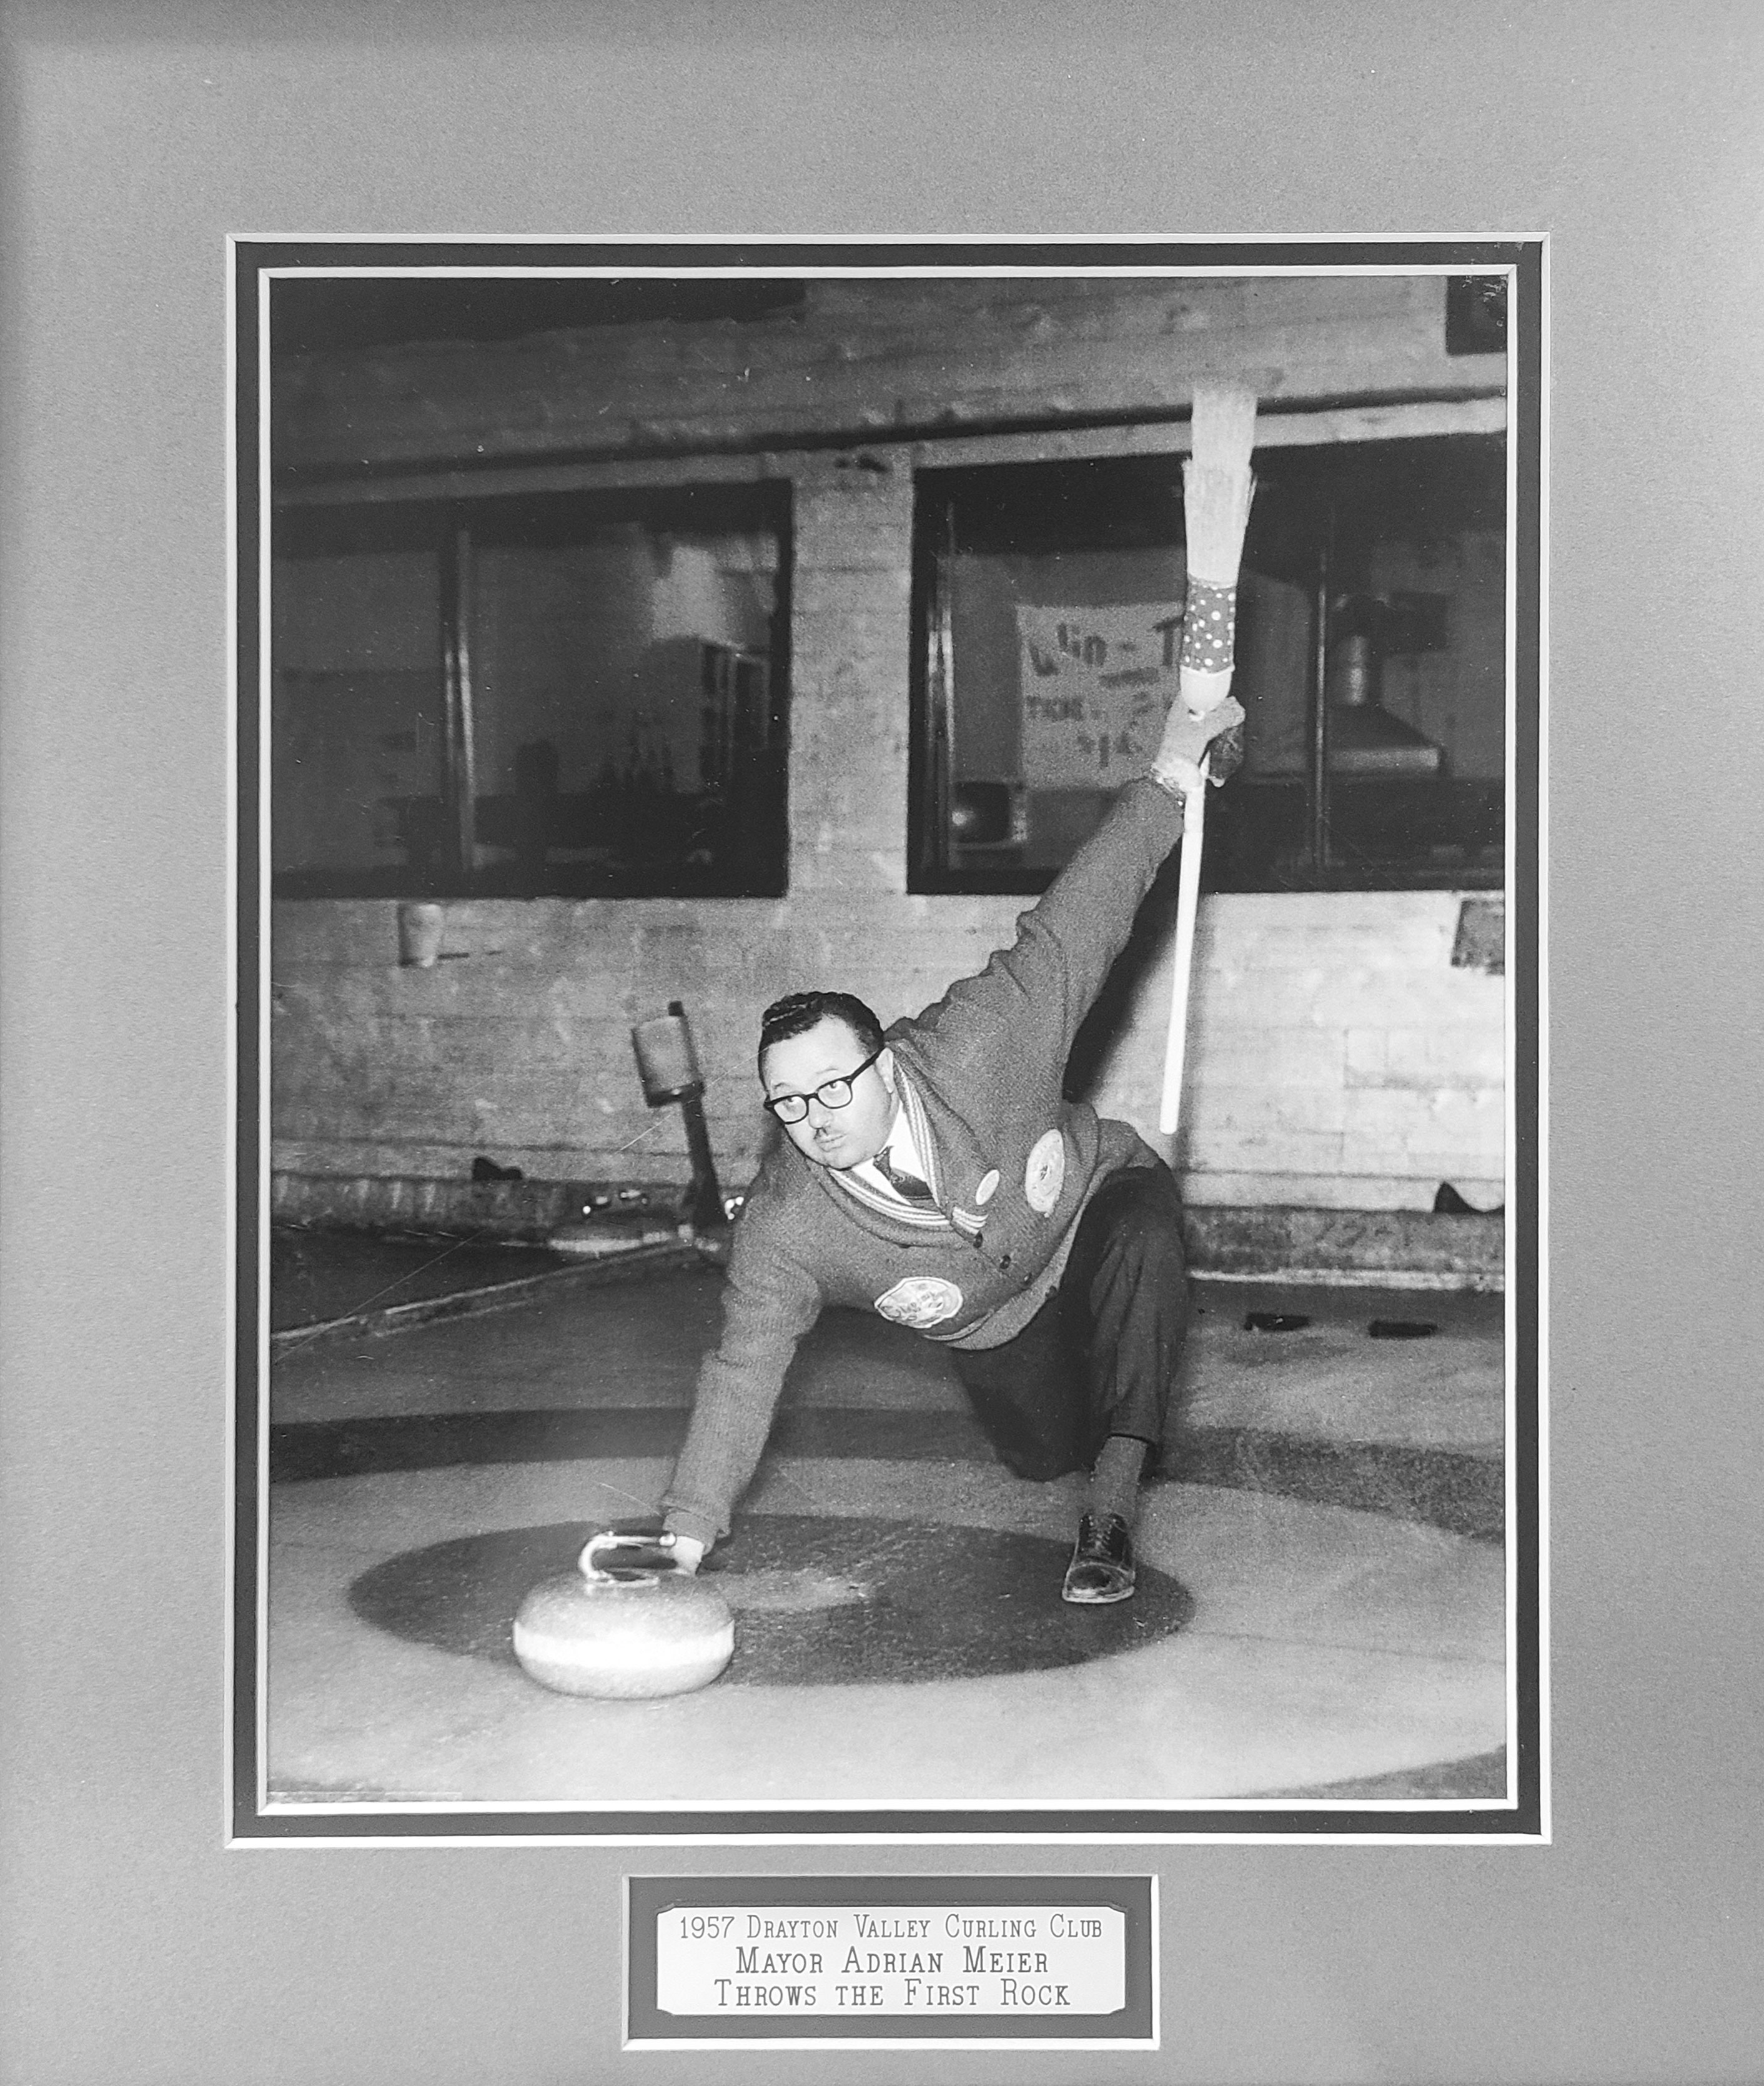 The first curling rock on the ice, thrown in 1957